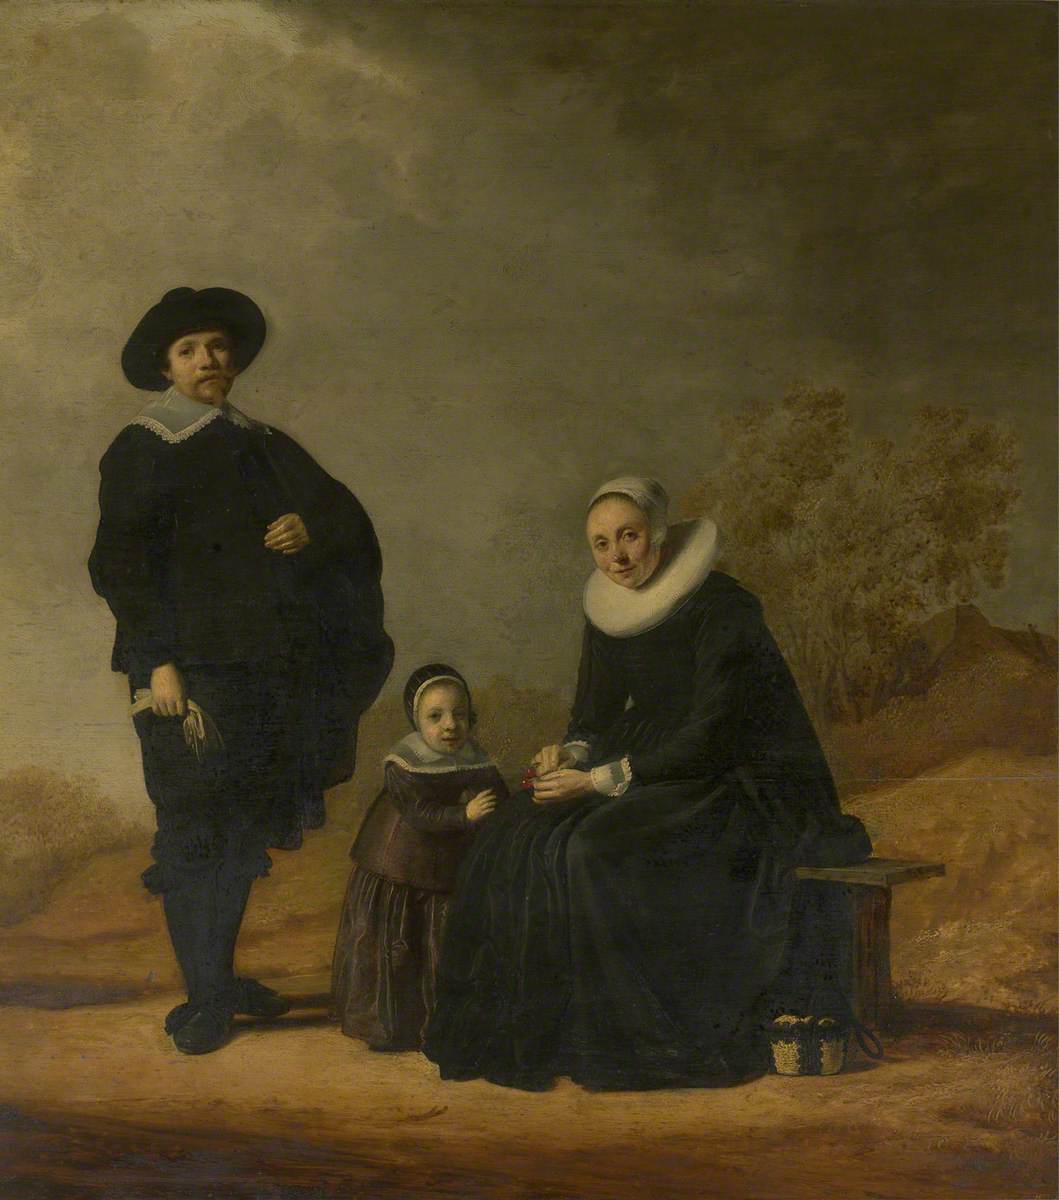 Family in a Landscape